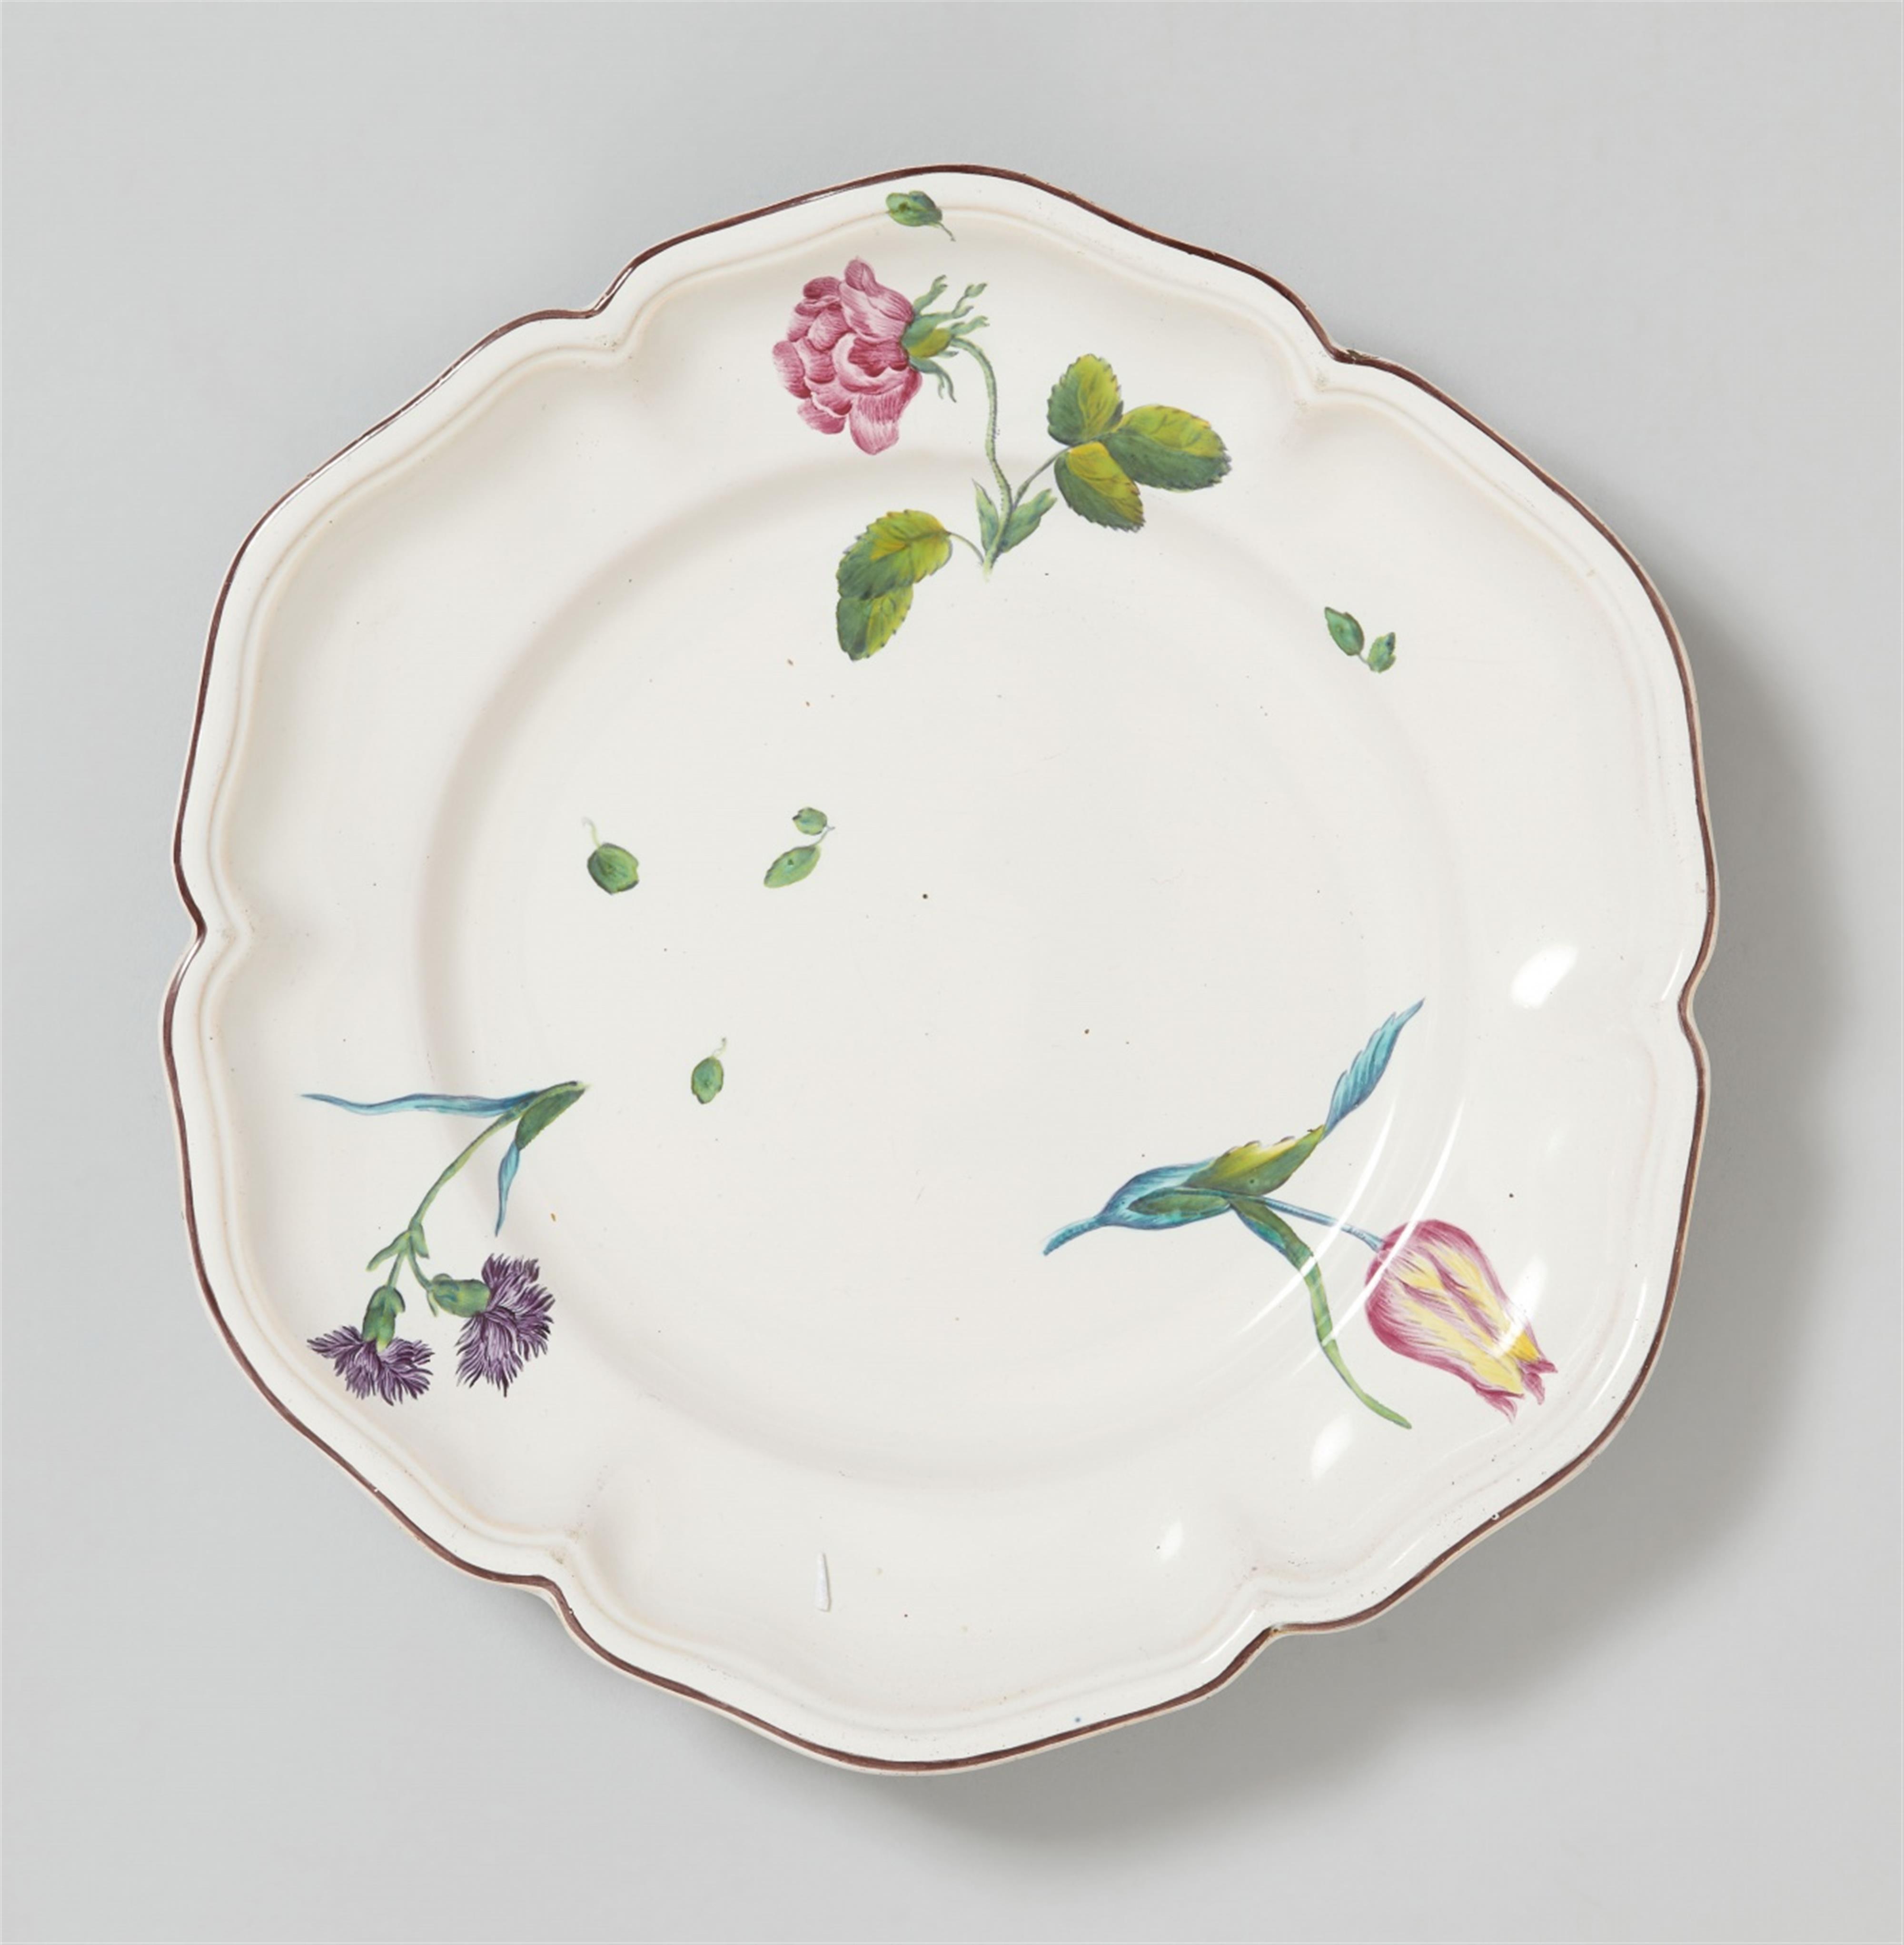 A Strasbourg faience platter with "fleurs fines" decor - image-1